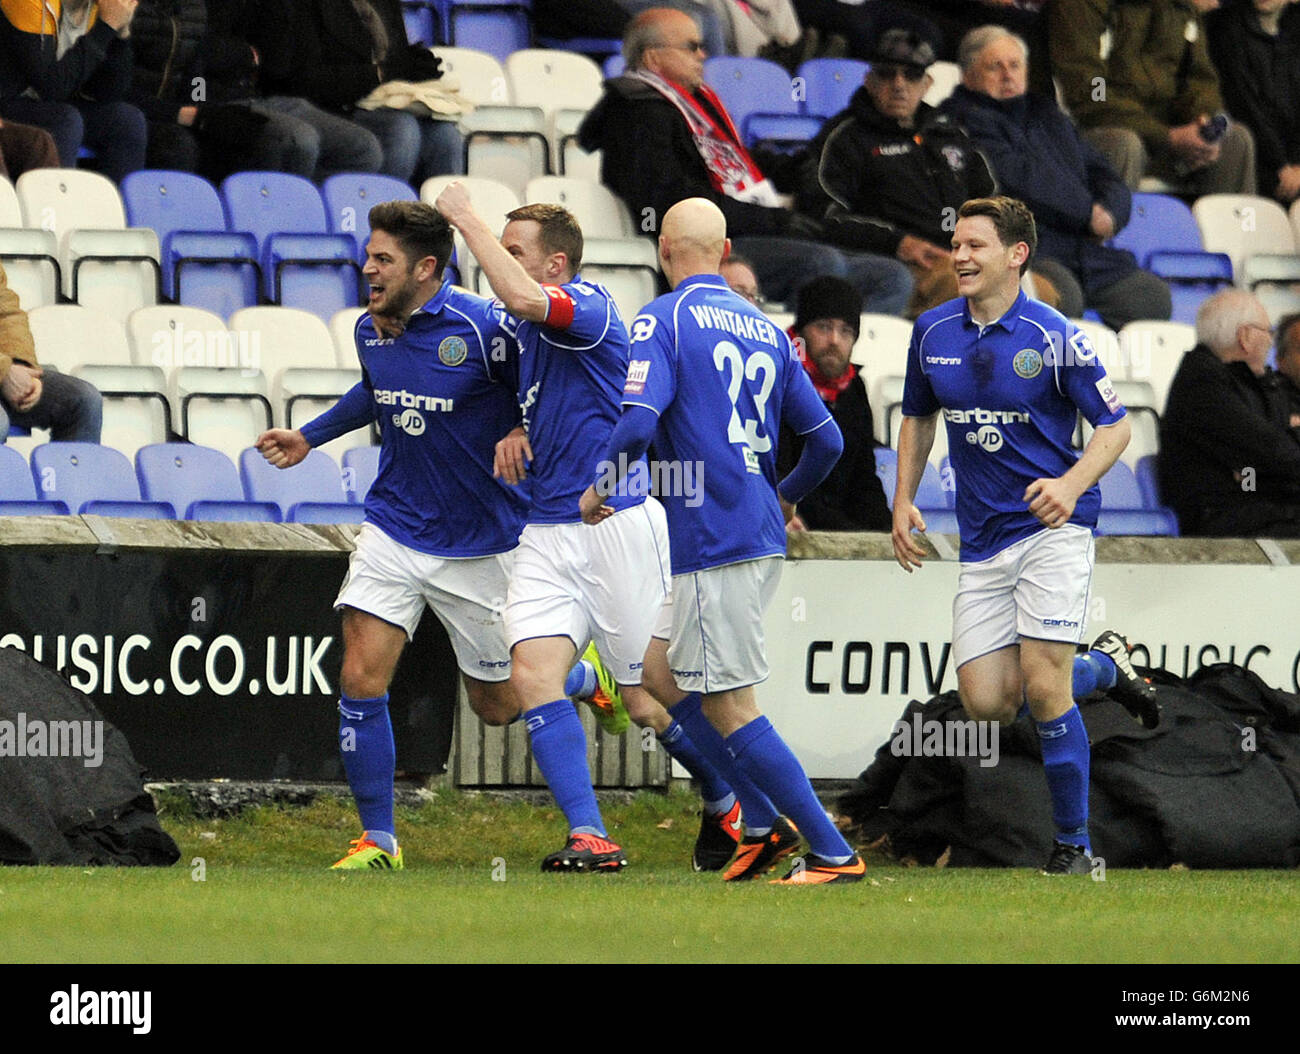 Macclesfield Town's Danny Andrew (left) celebrates after he scores the first goal of the game during the FA Cup match at Moss Rose, Macclesfield. Stock Photo